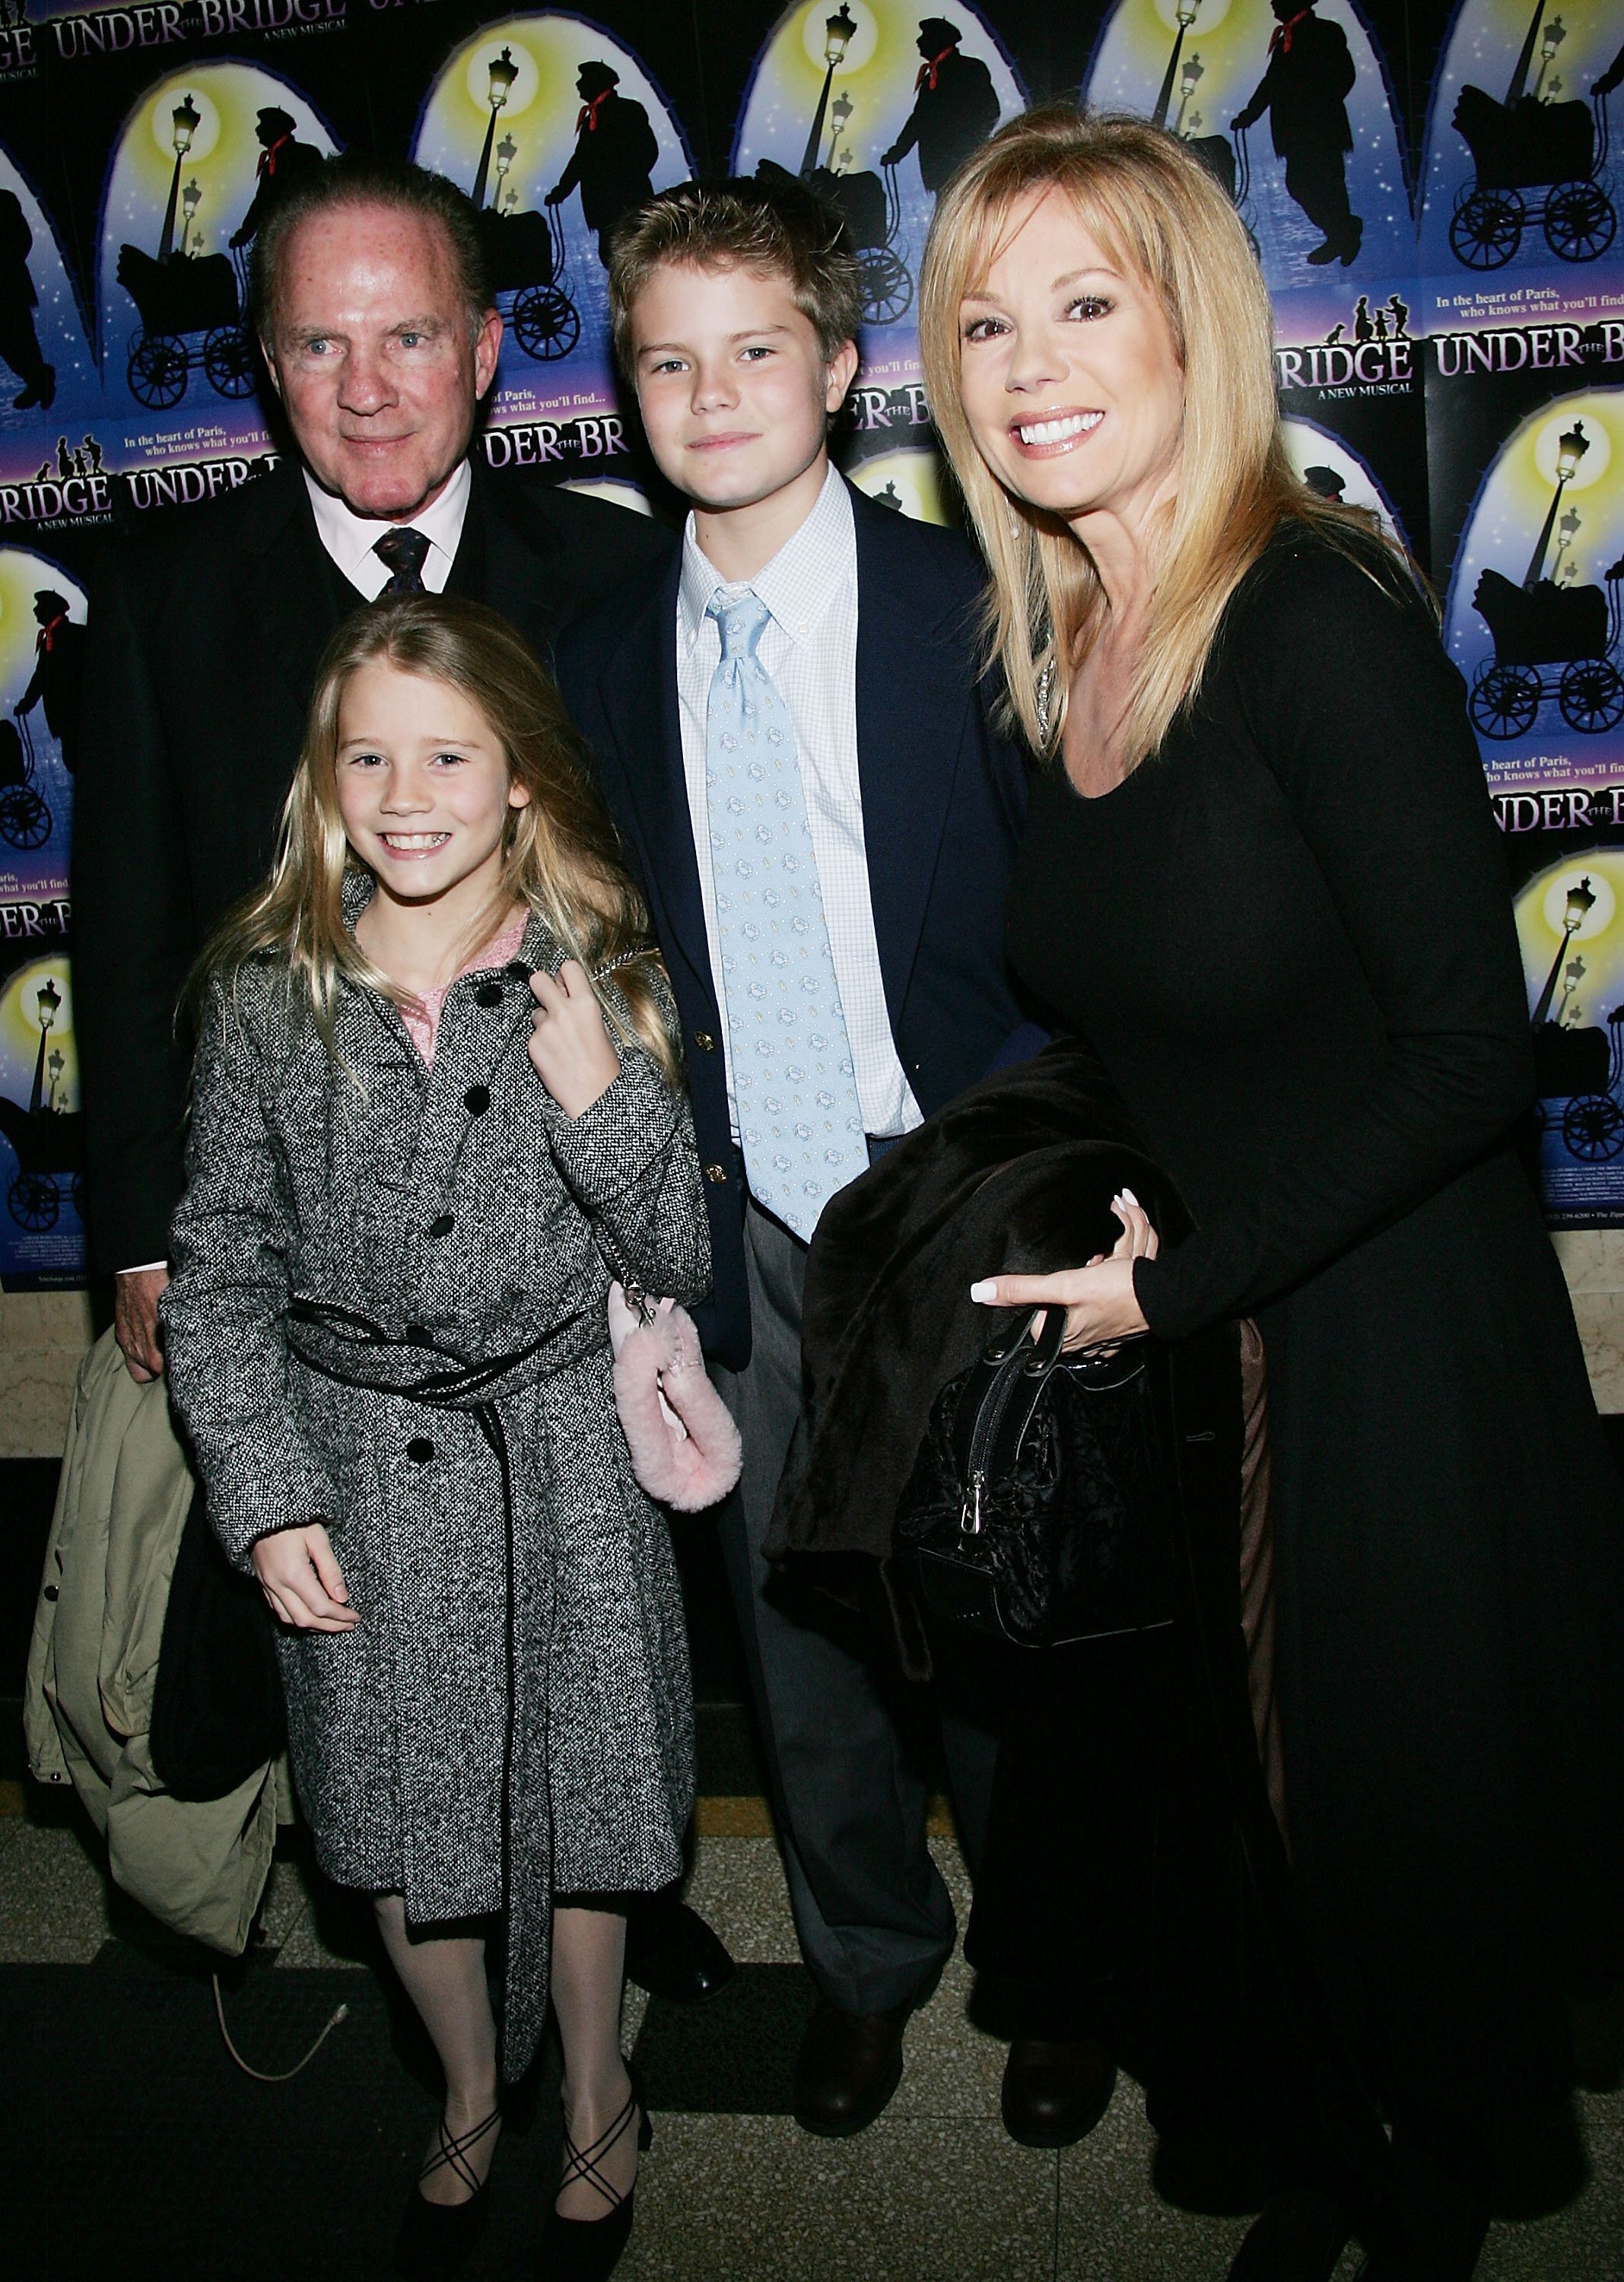 Kathie Lee and Frank Gifford with son Cody and daughter Cassidy at the opening night of Kathie Lee's new musical "Under The Bridge" on January 6, 2005, in New York City. | Source: Evan Agostini/Getty Images